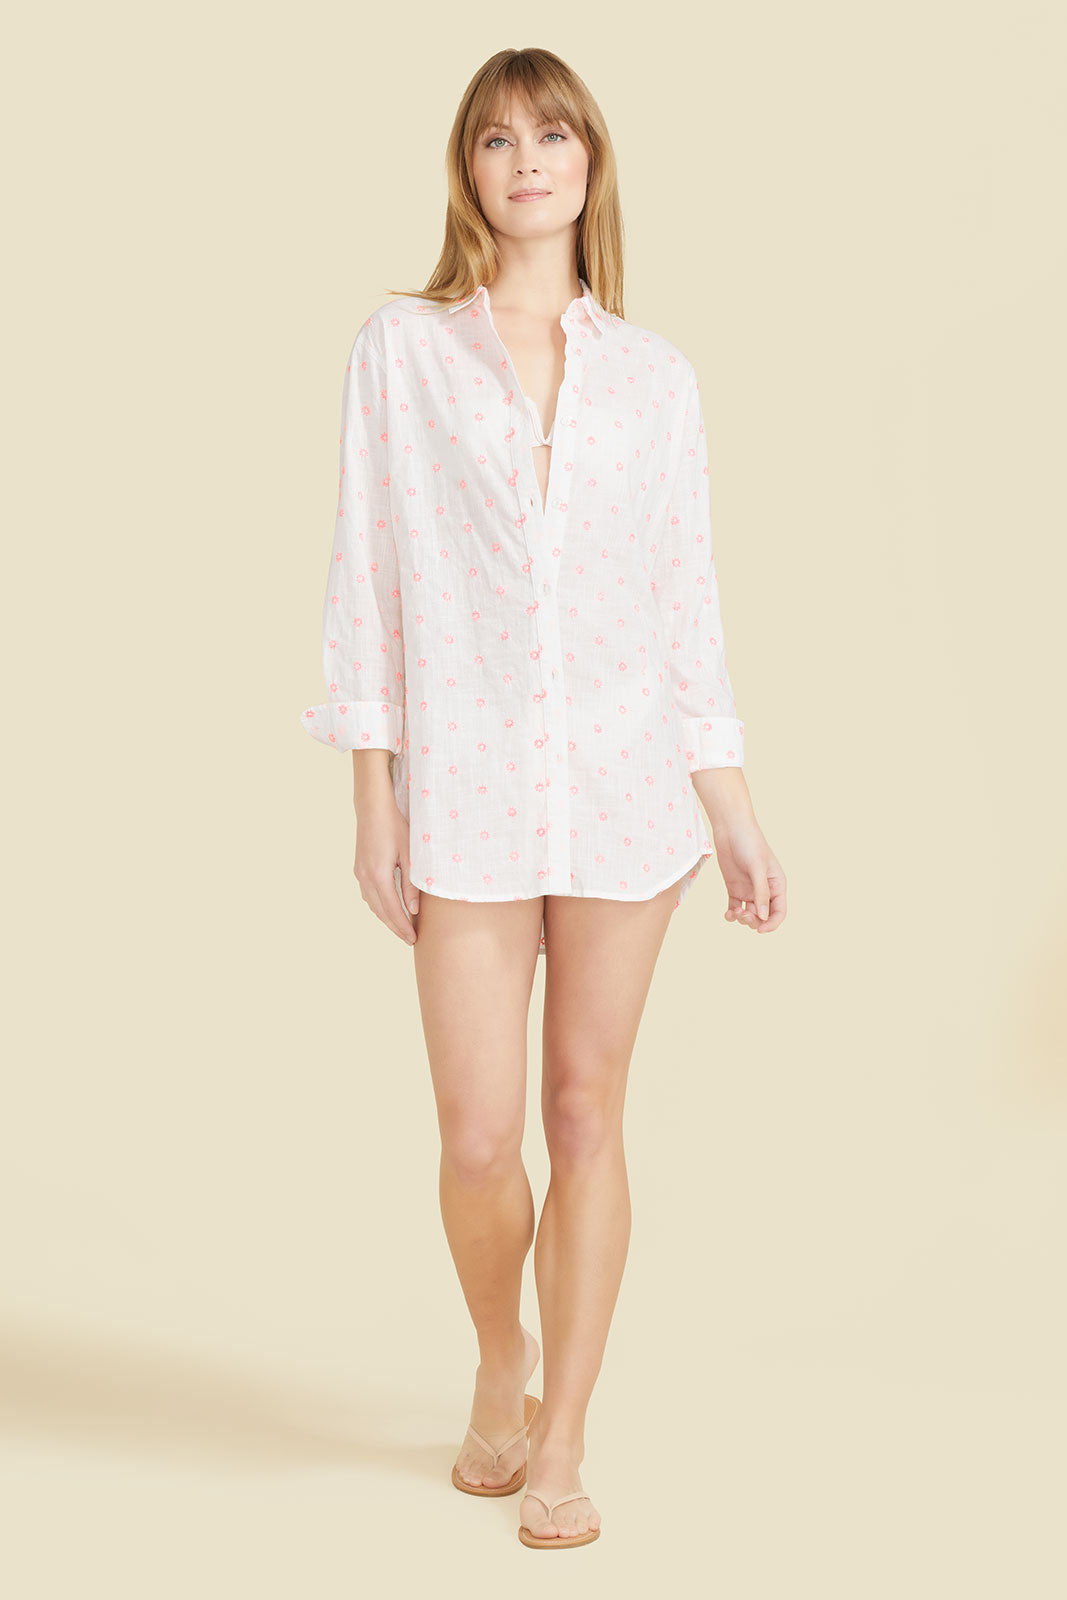 Primavera Shirt Dress - White with Pink Flowers by Sitano